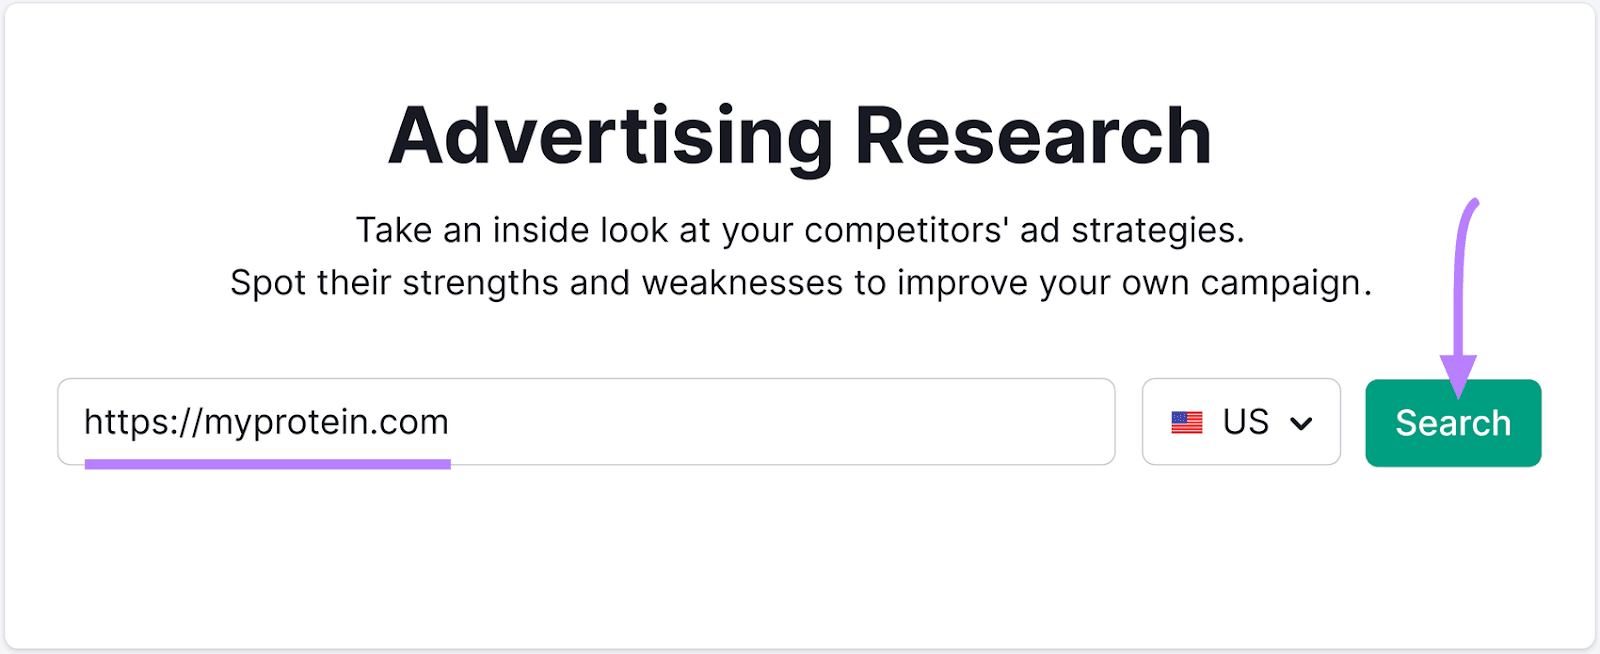 "https://myprotein.com" entered into the Advertising Research tool search bar